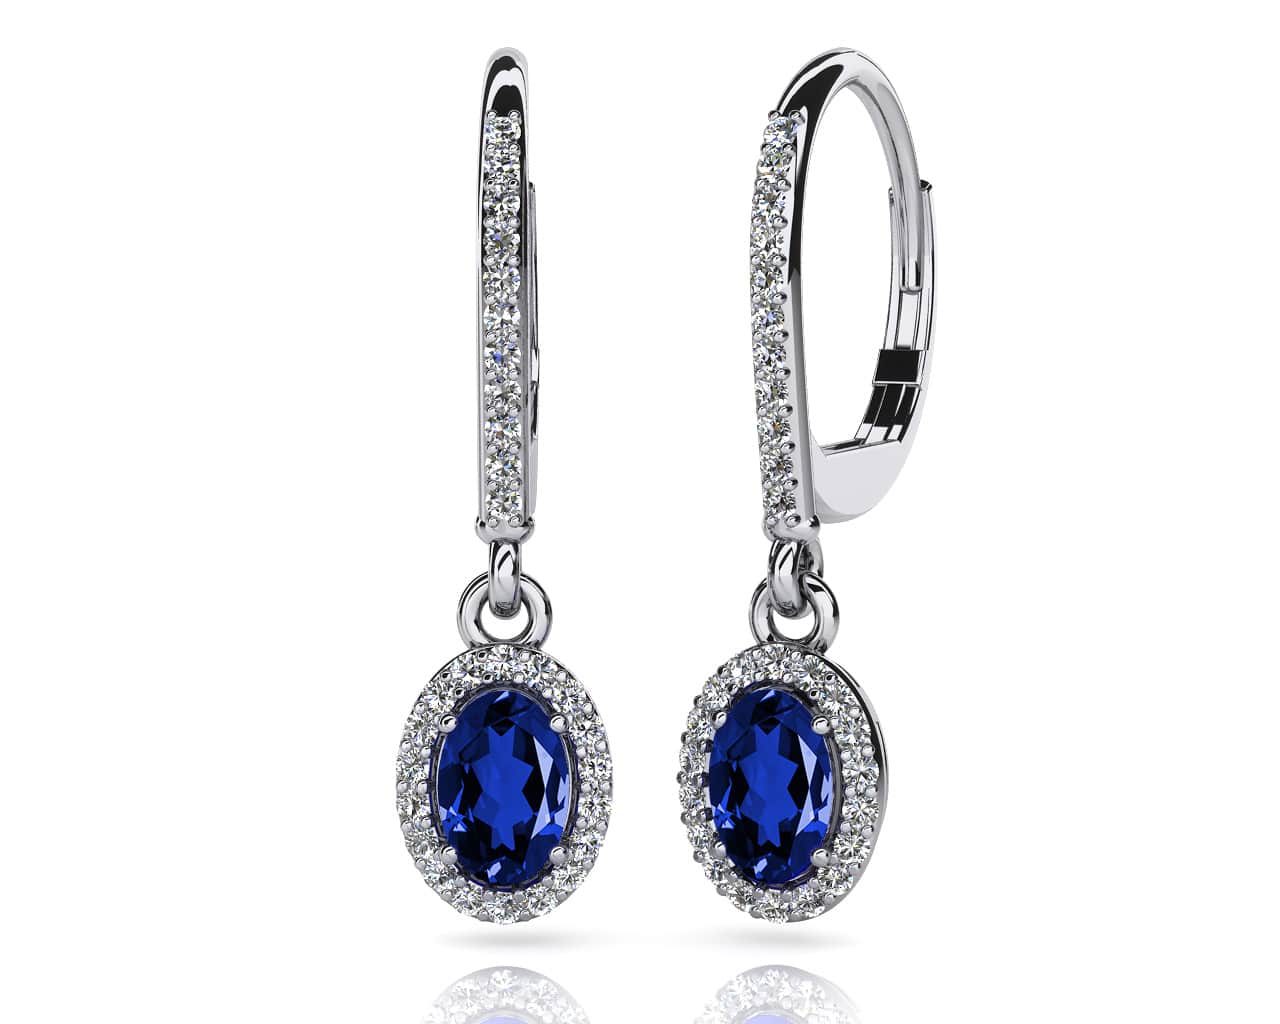 Oval Shaped Gemstone And Diamond Earrings In 18K 14K Yellow Gold Or White Gold